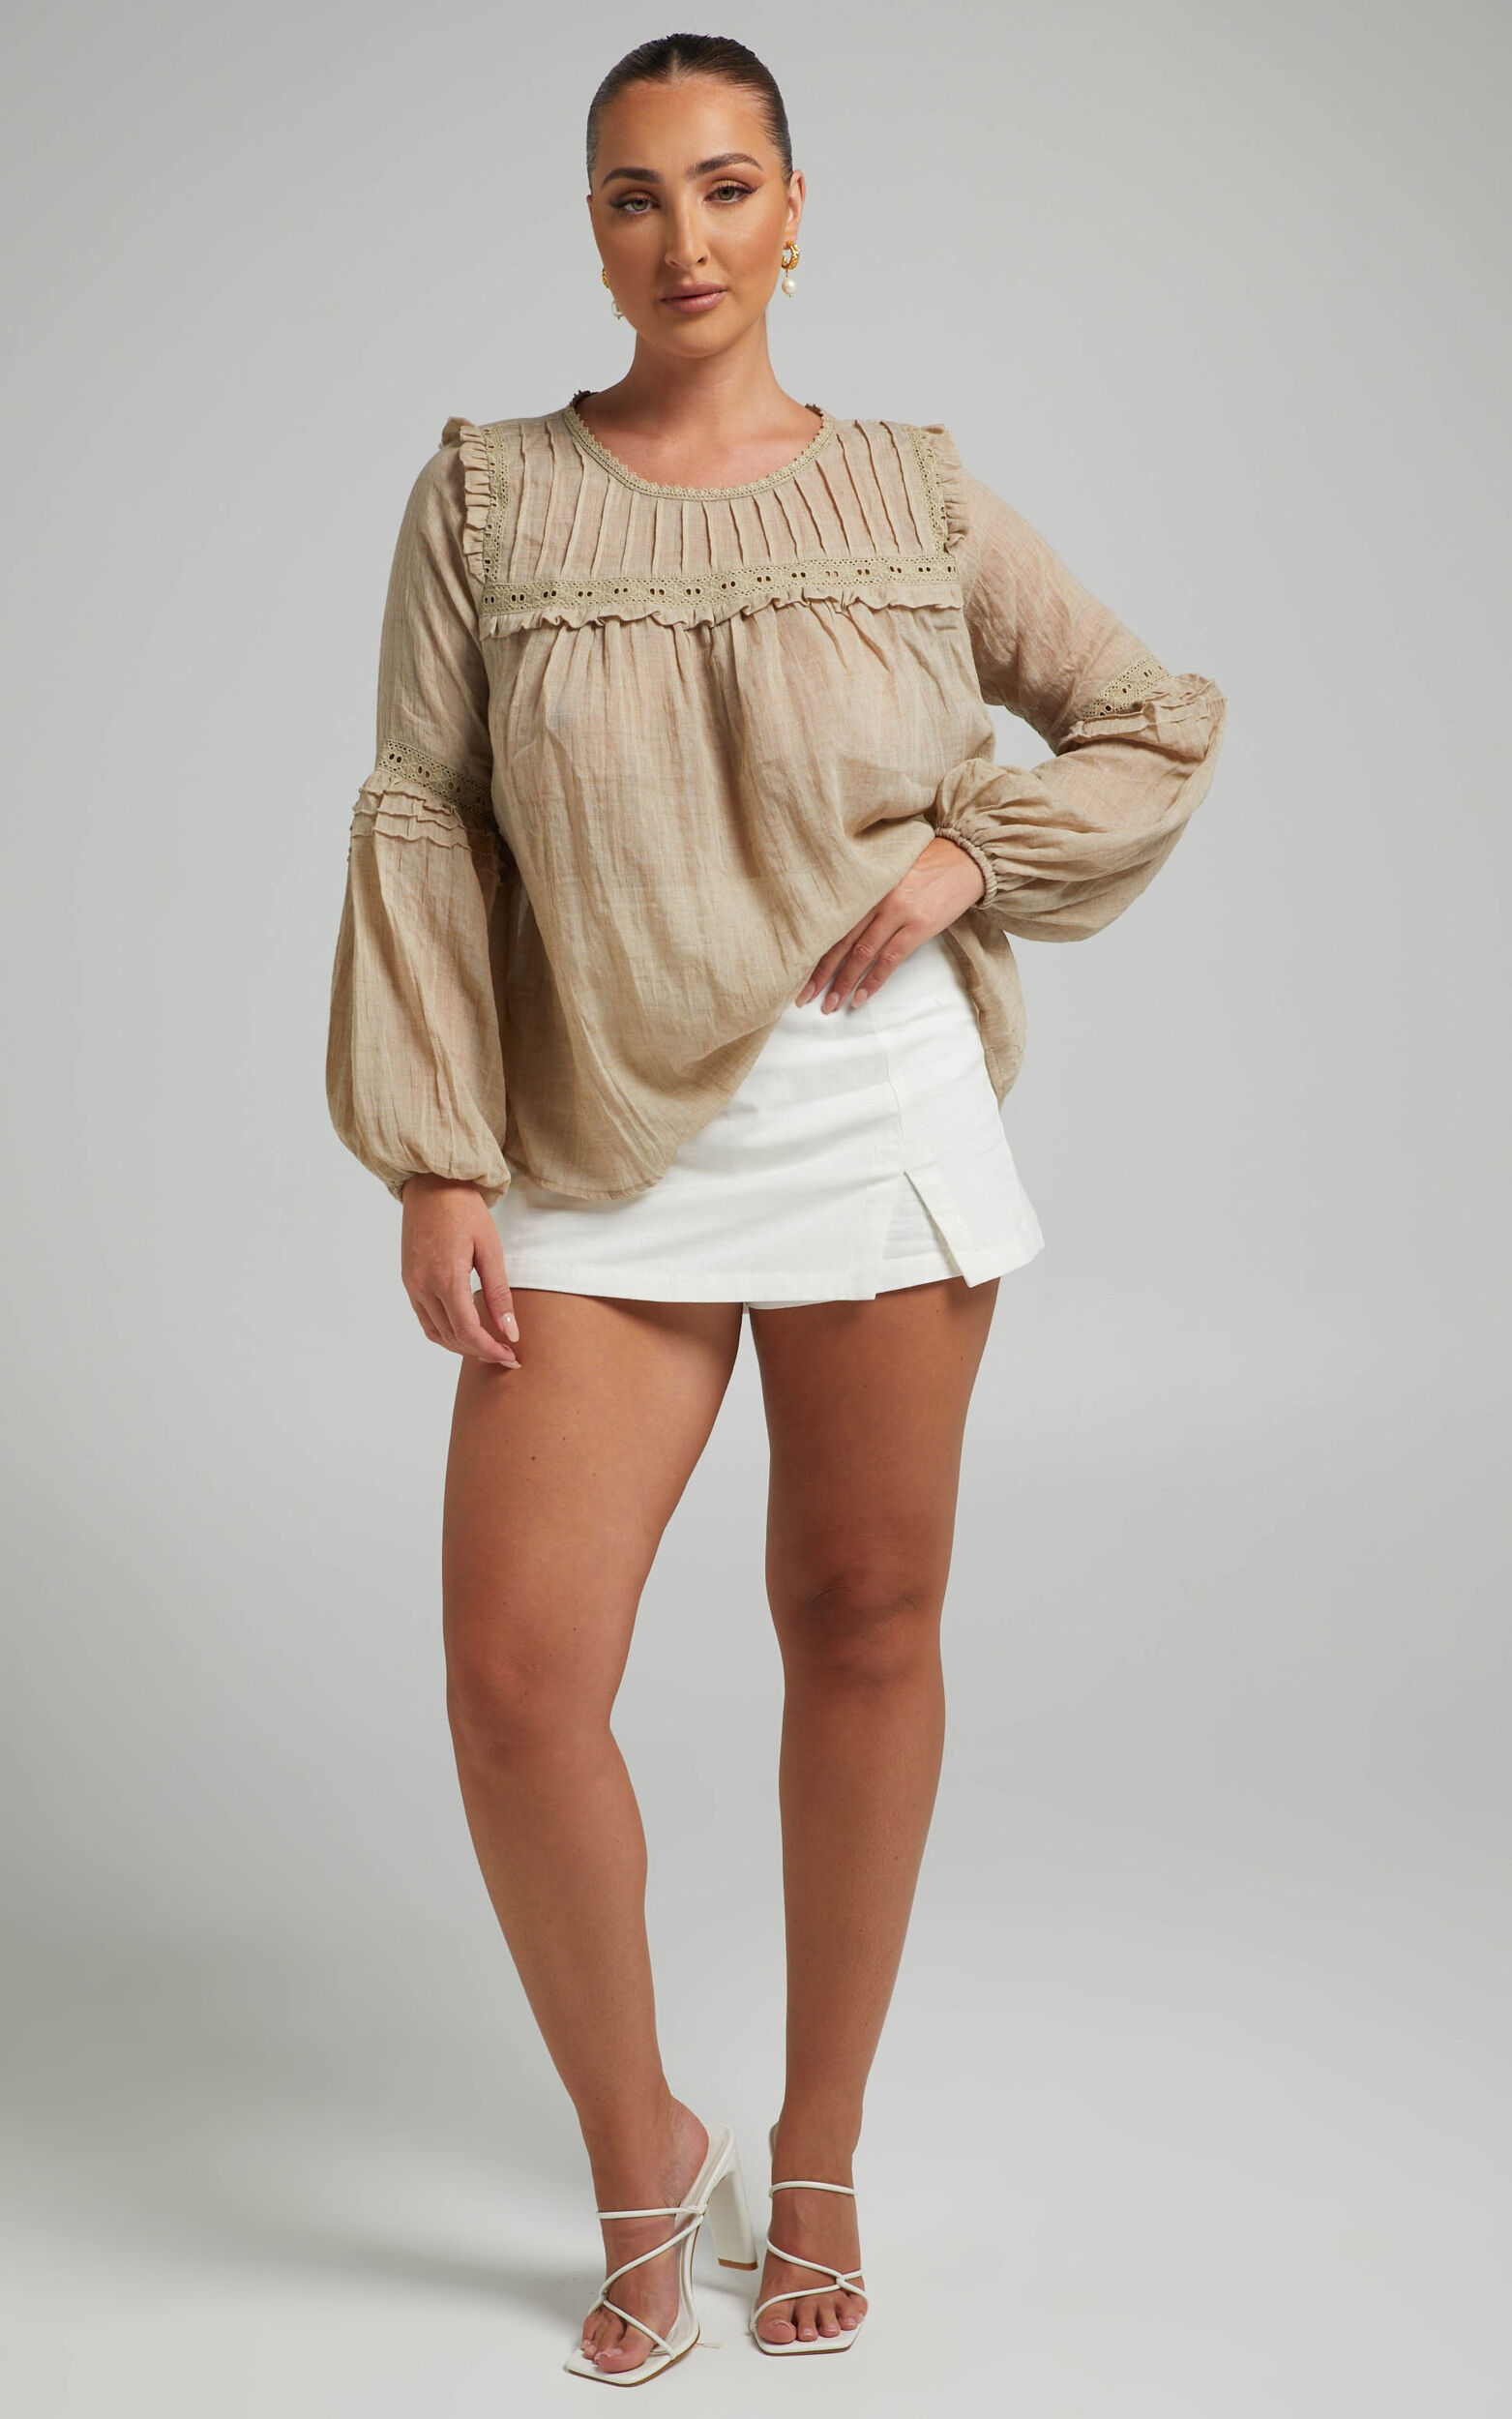 Izeth Long Sleeve Broderie Trim Blouse in Beige - 06, CRE1, super-hi-res image number null